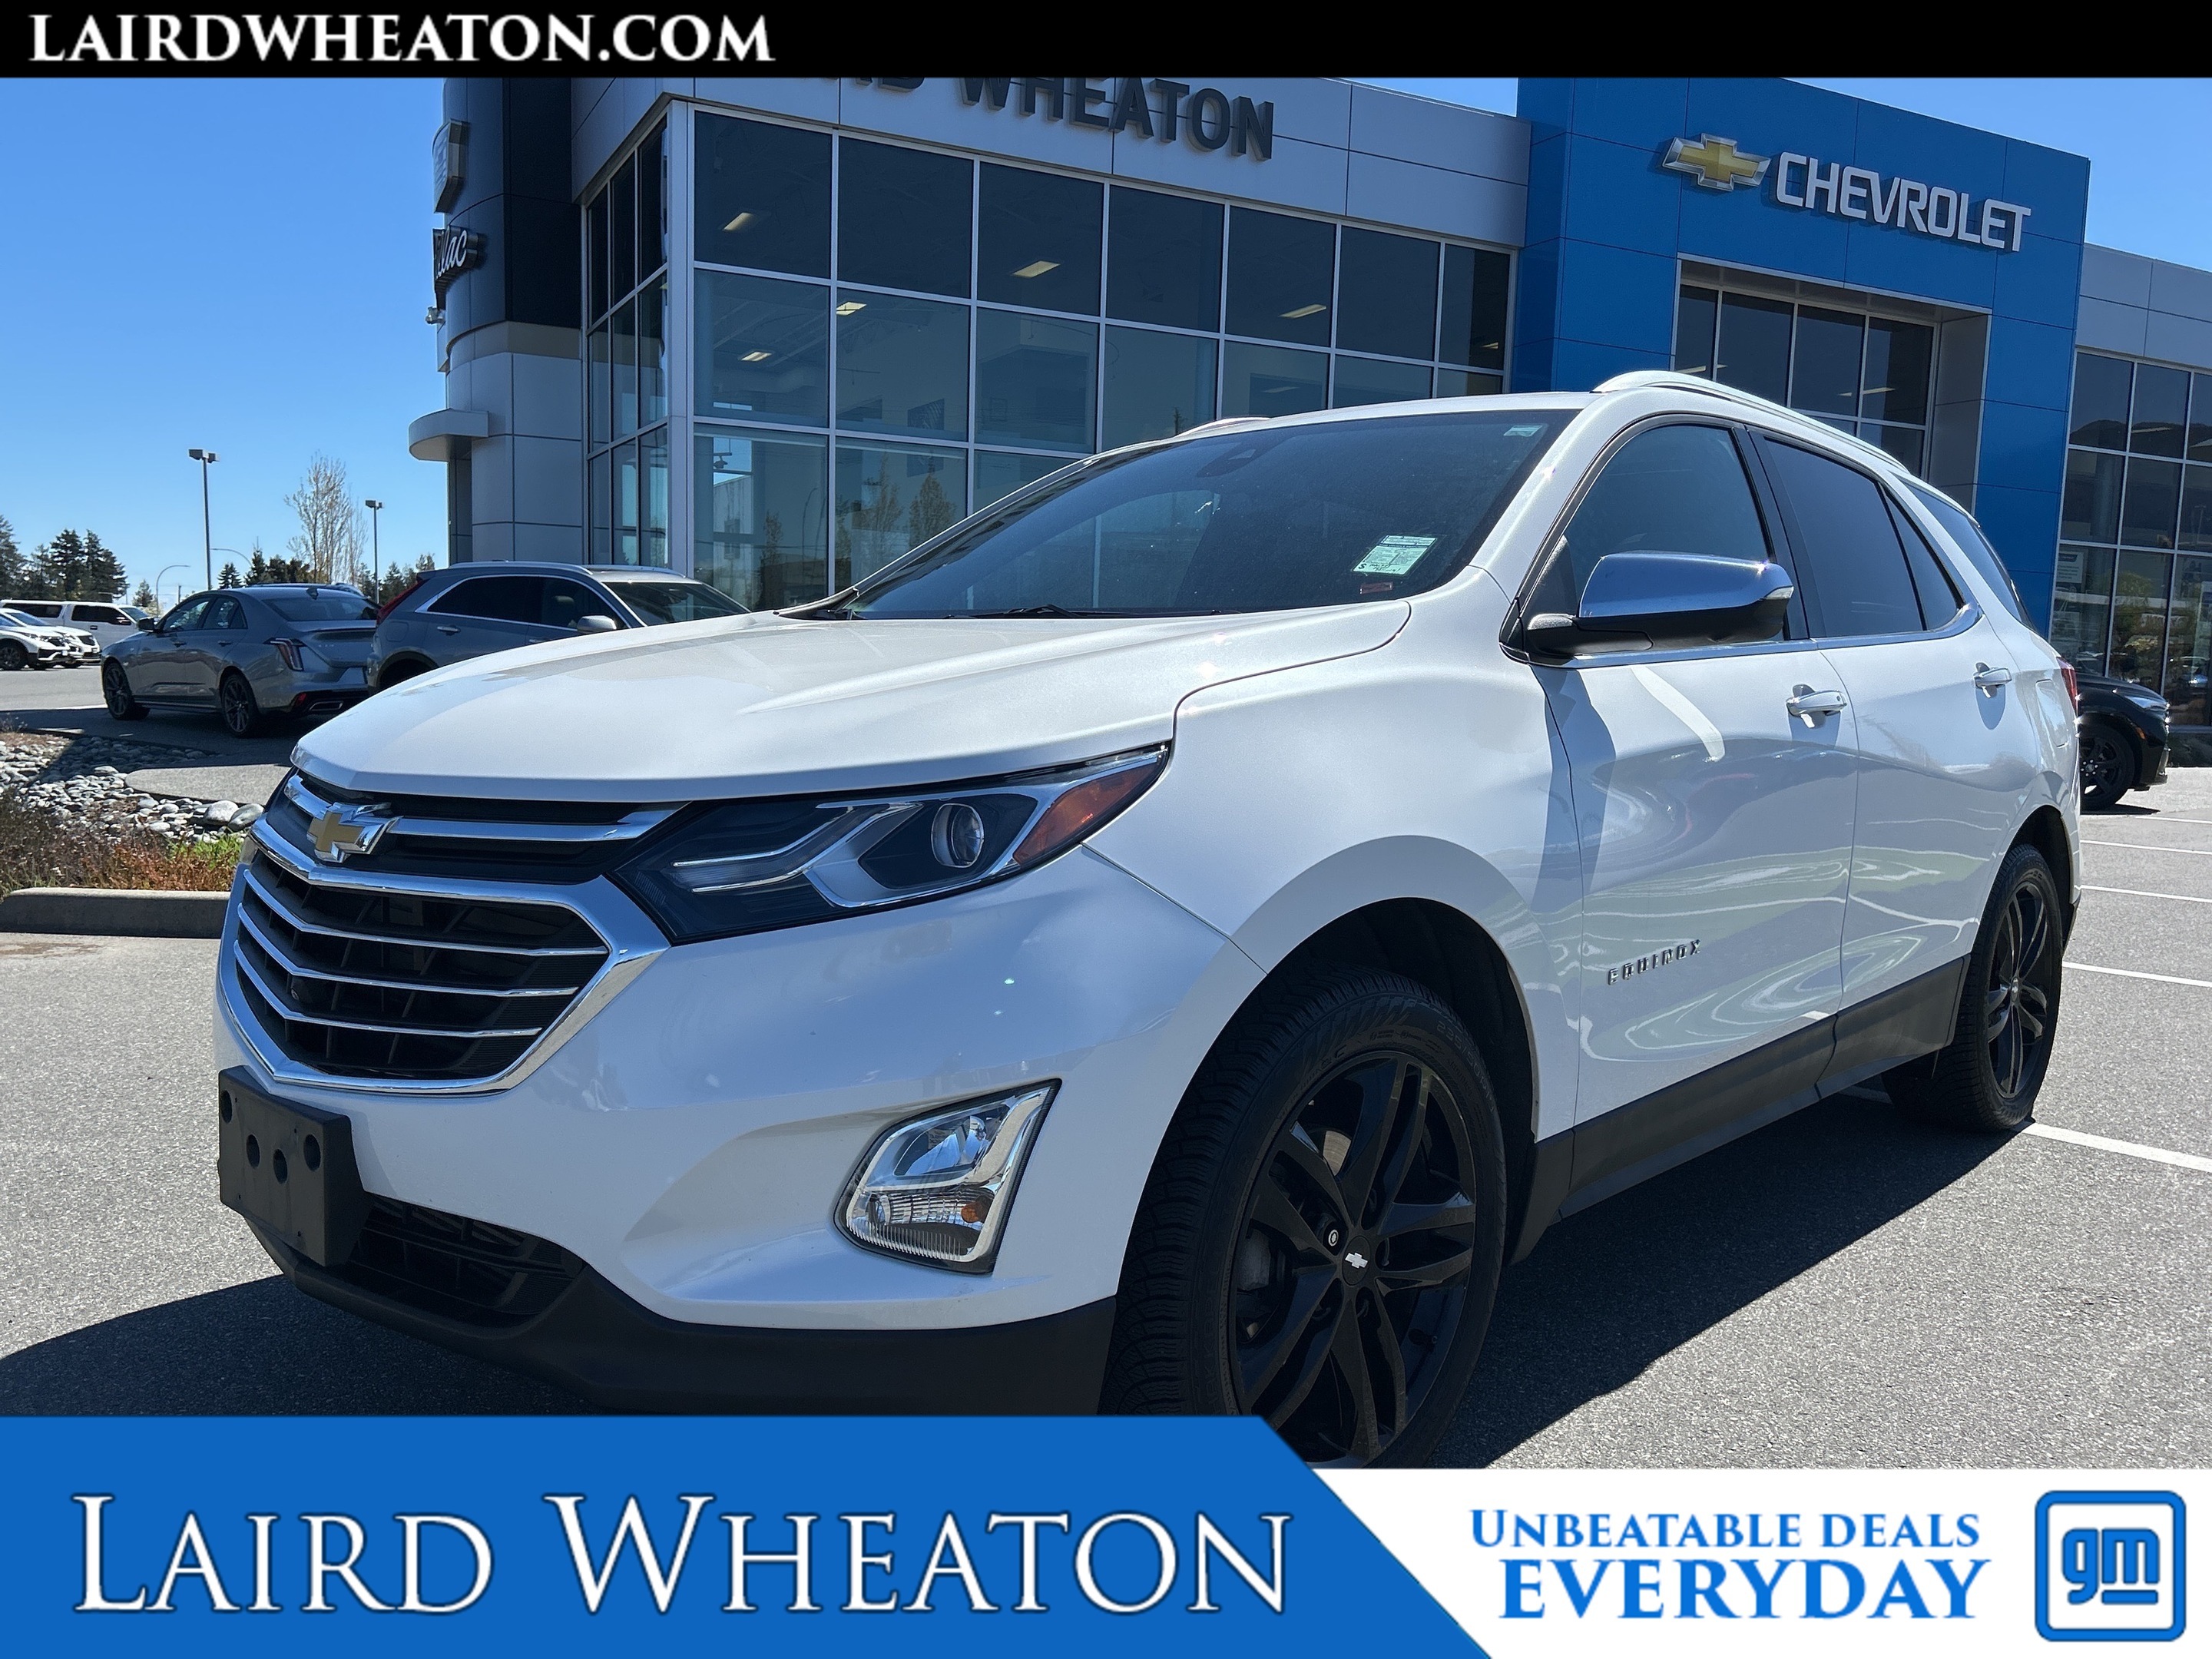 2020 Chevrolet Equinox Premier AWD, 4 Cylinder, Advanced Safety Features